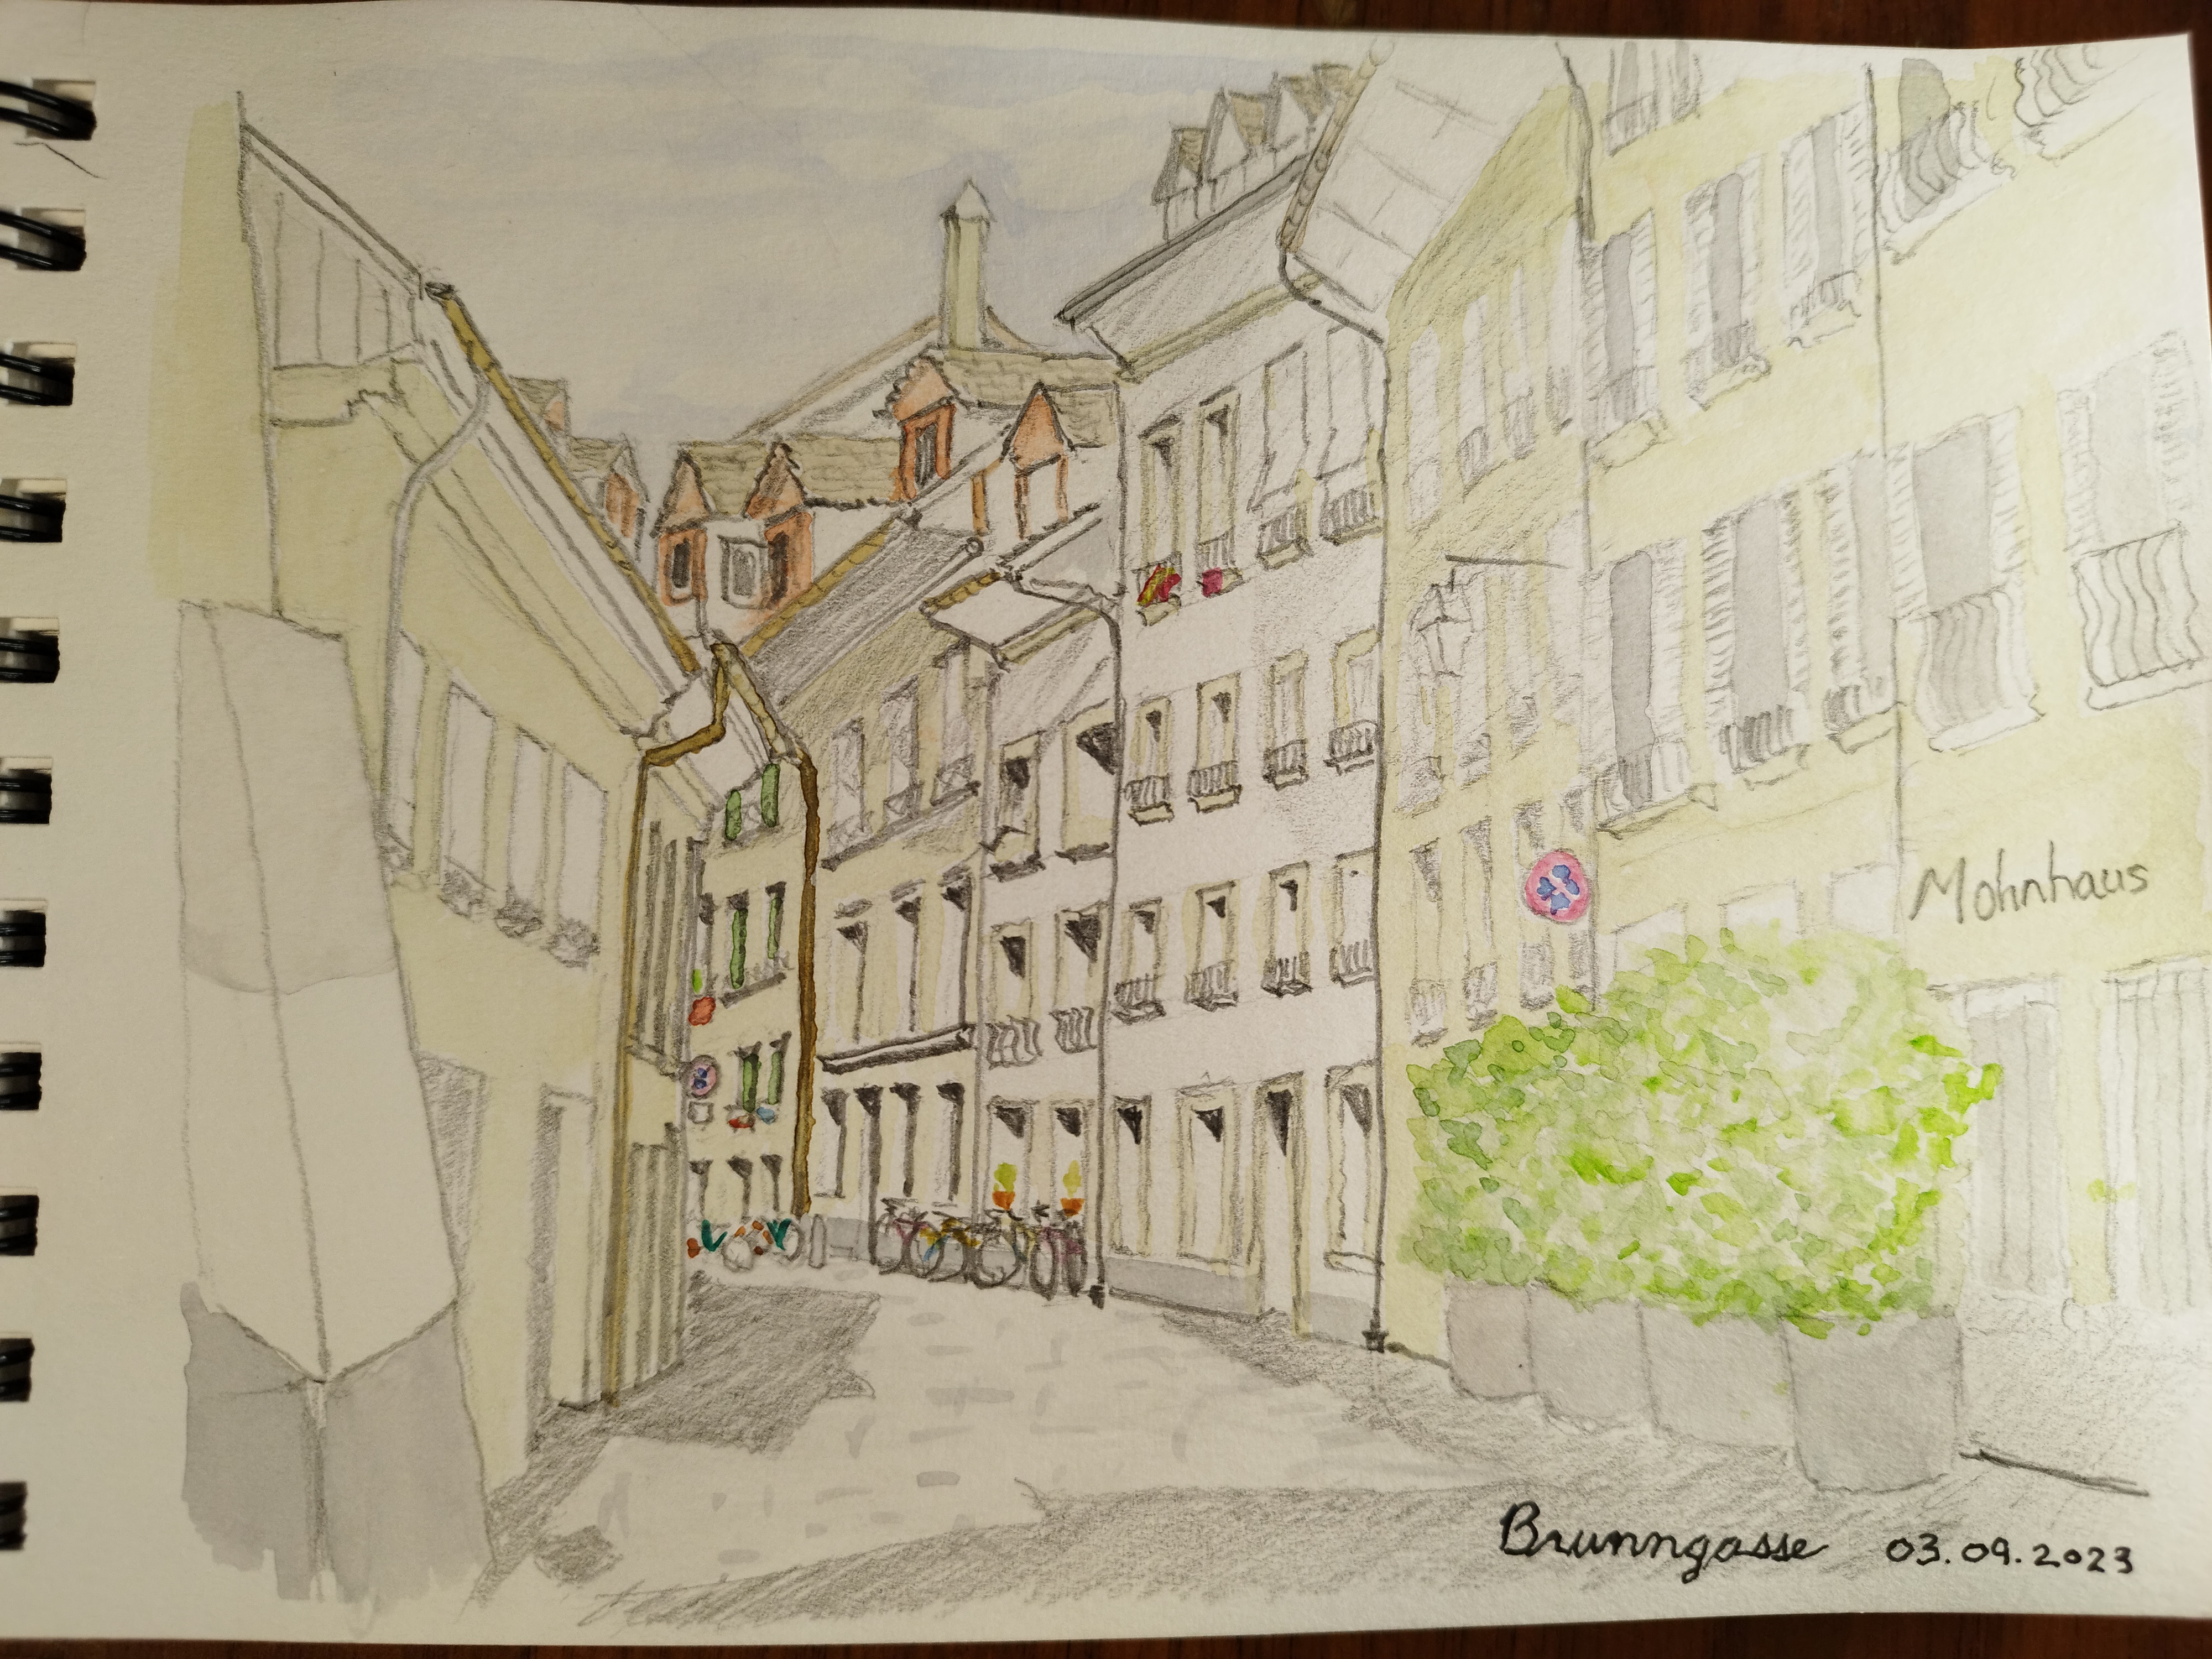 watercolour and pencil sketch of Brunngasse, Bern, looking north in morning sun illumination